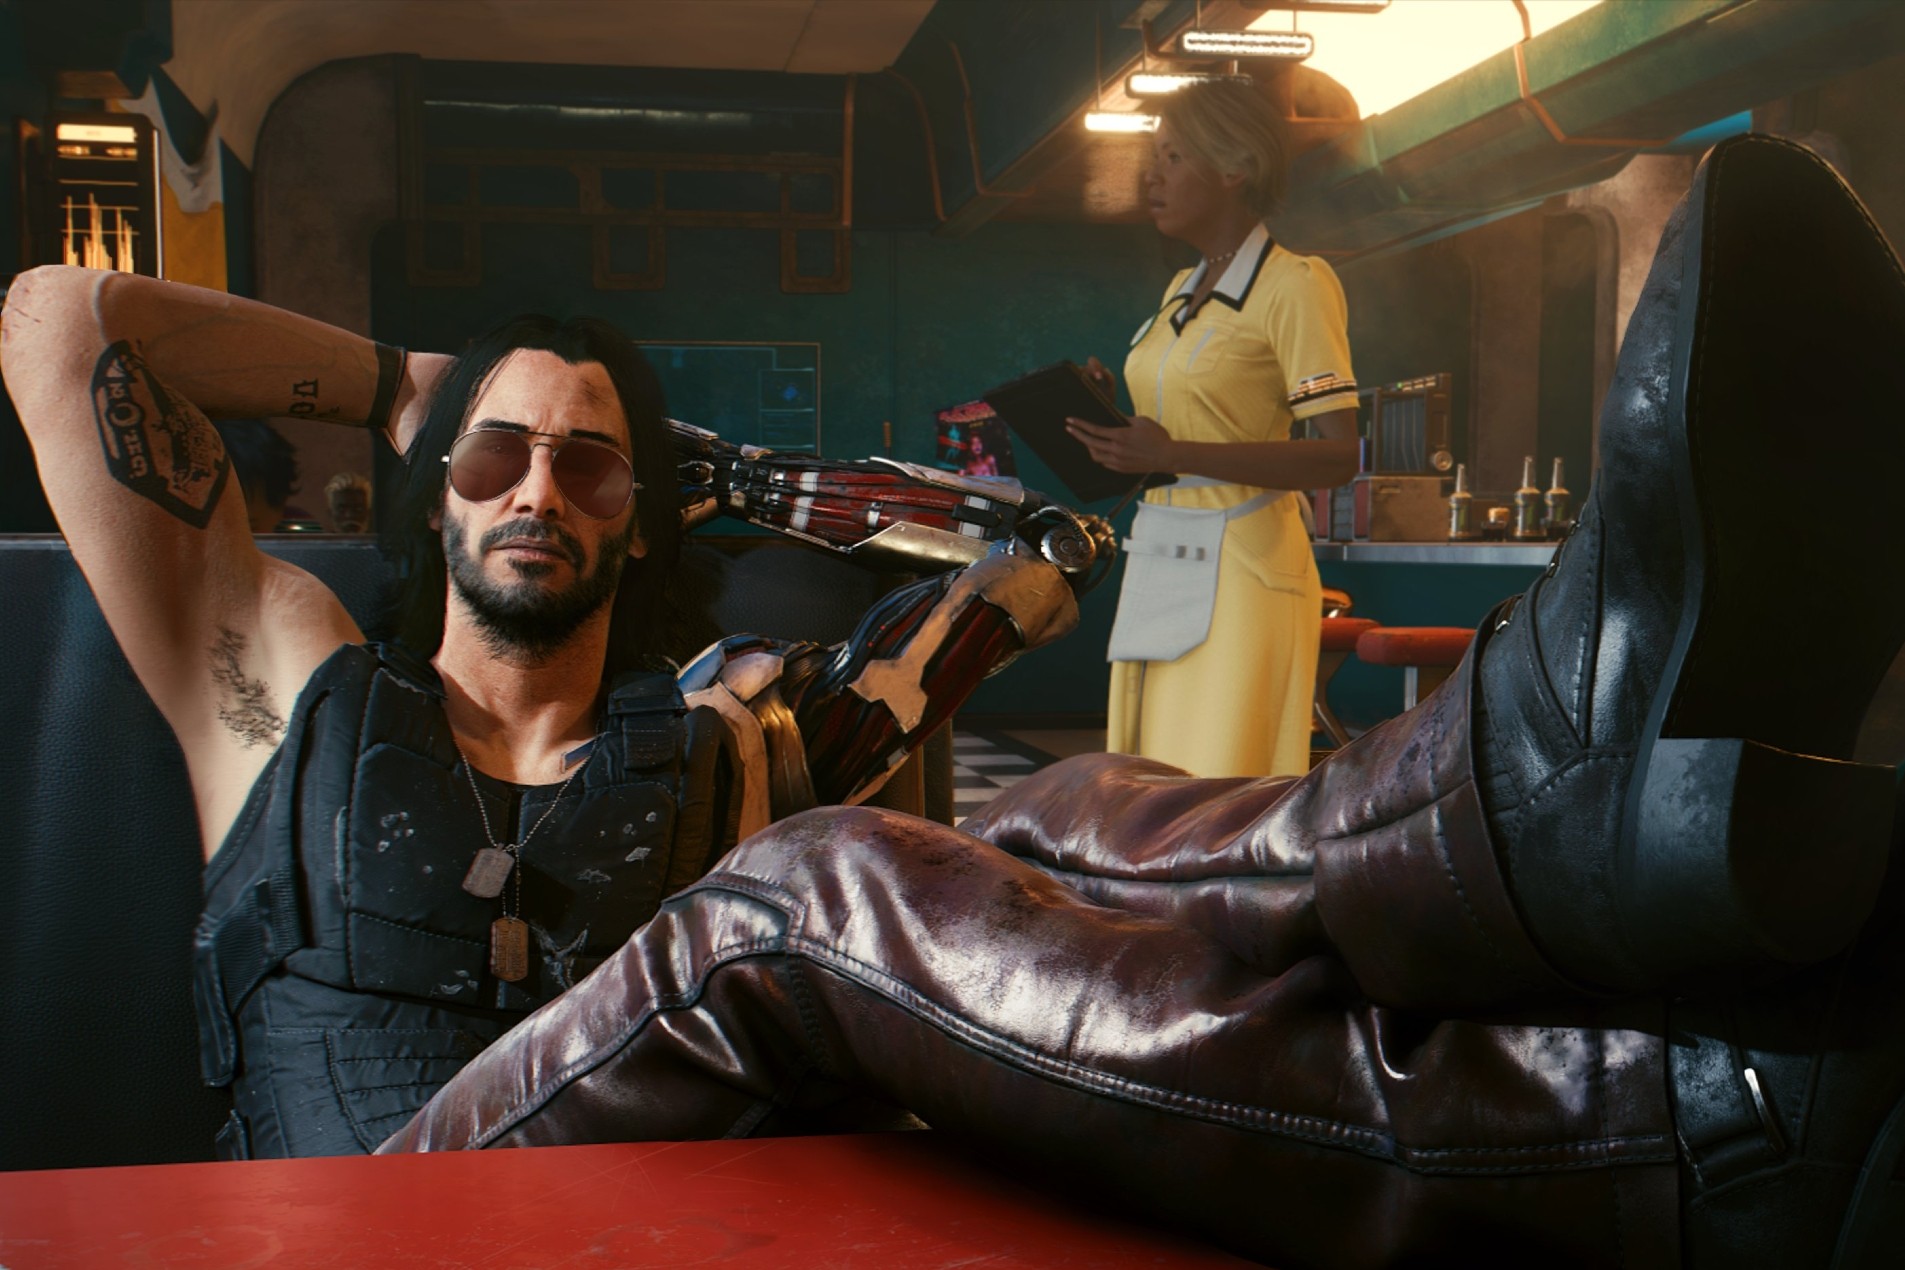 How To Download Cyberpunk 2077's PS5 Upgrade And Transfer Your Save -  GameSpot